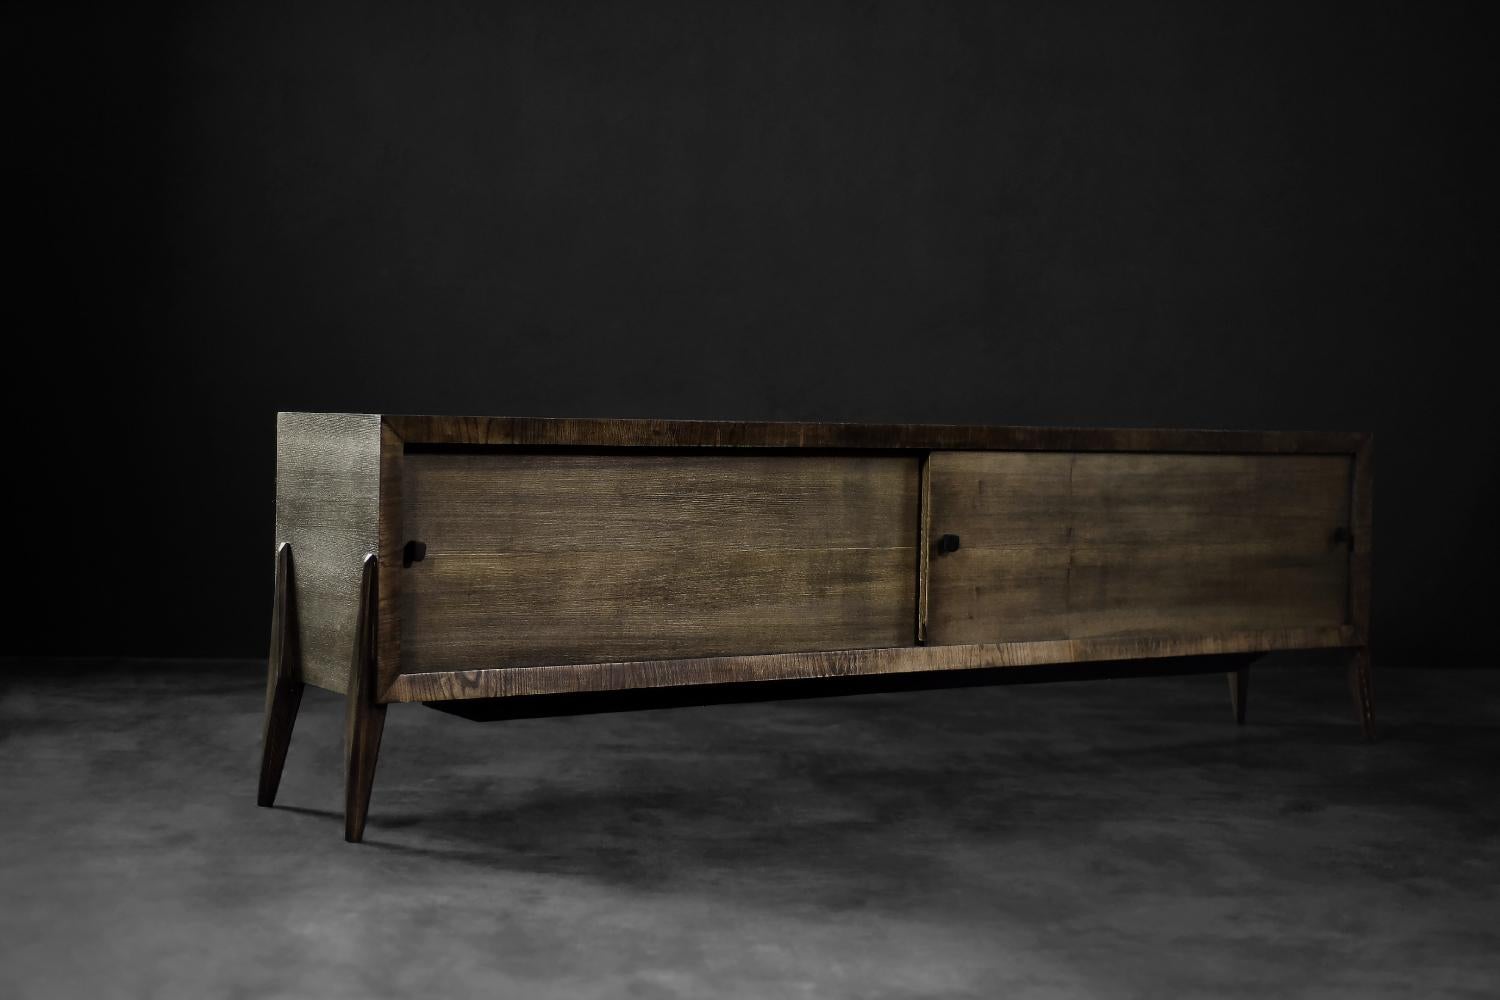 This modernist, long sideboard was made in Scandinavia during the 1960s. It is made of noble ash wood. The final layer was finished in an earthy brown color with visible strong grain and shade transitions. The front consists of a pair of sliding